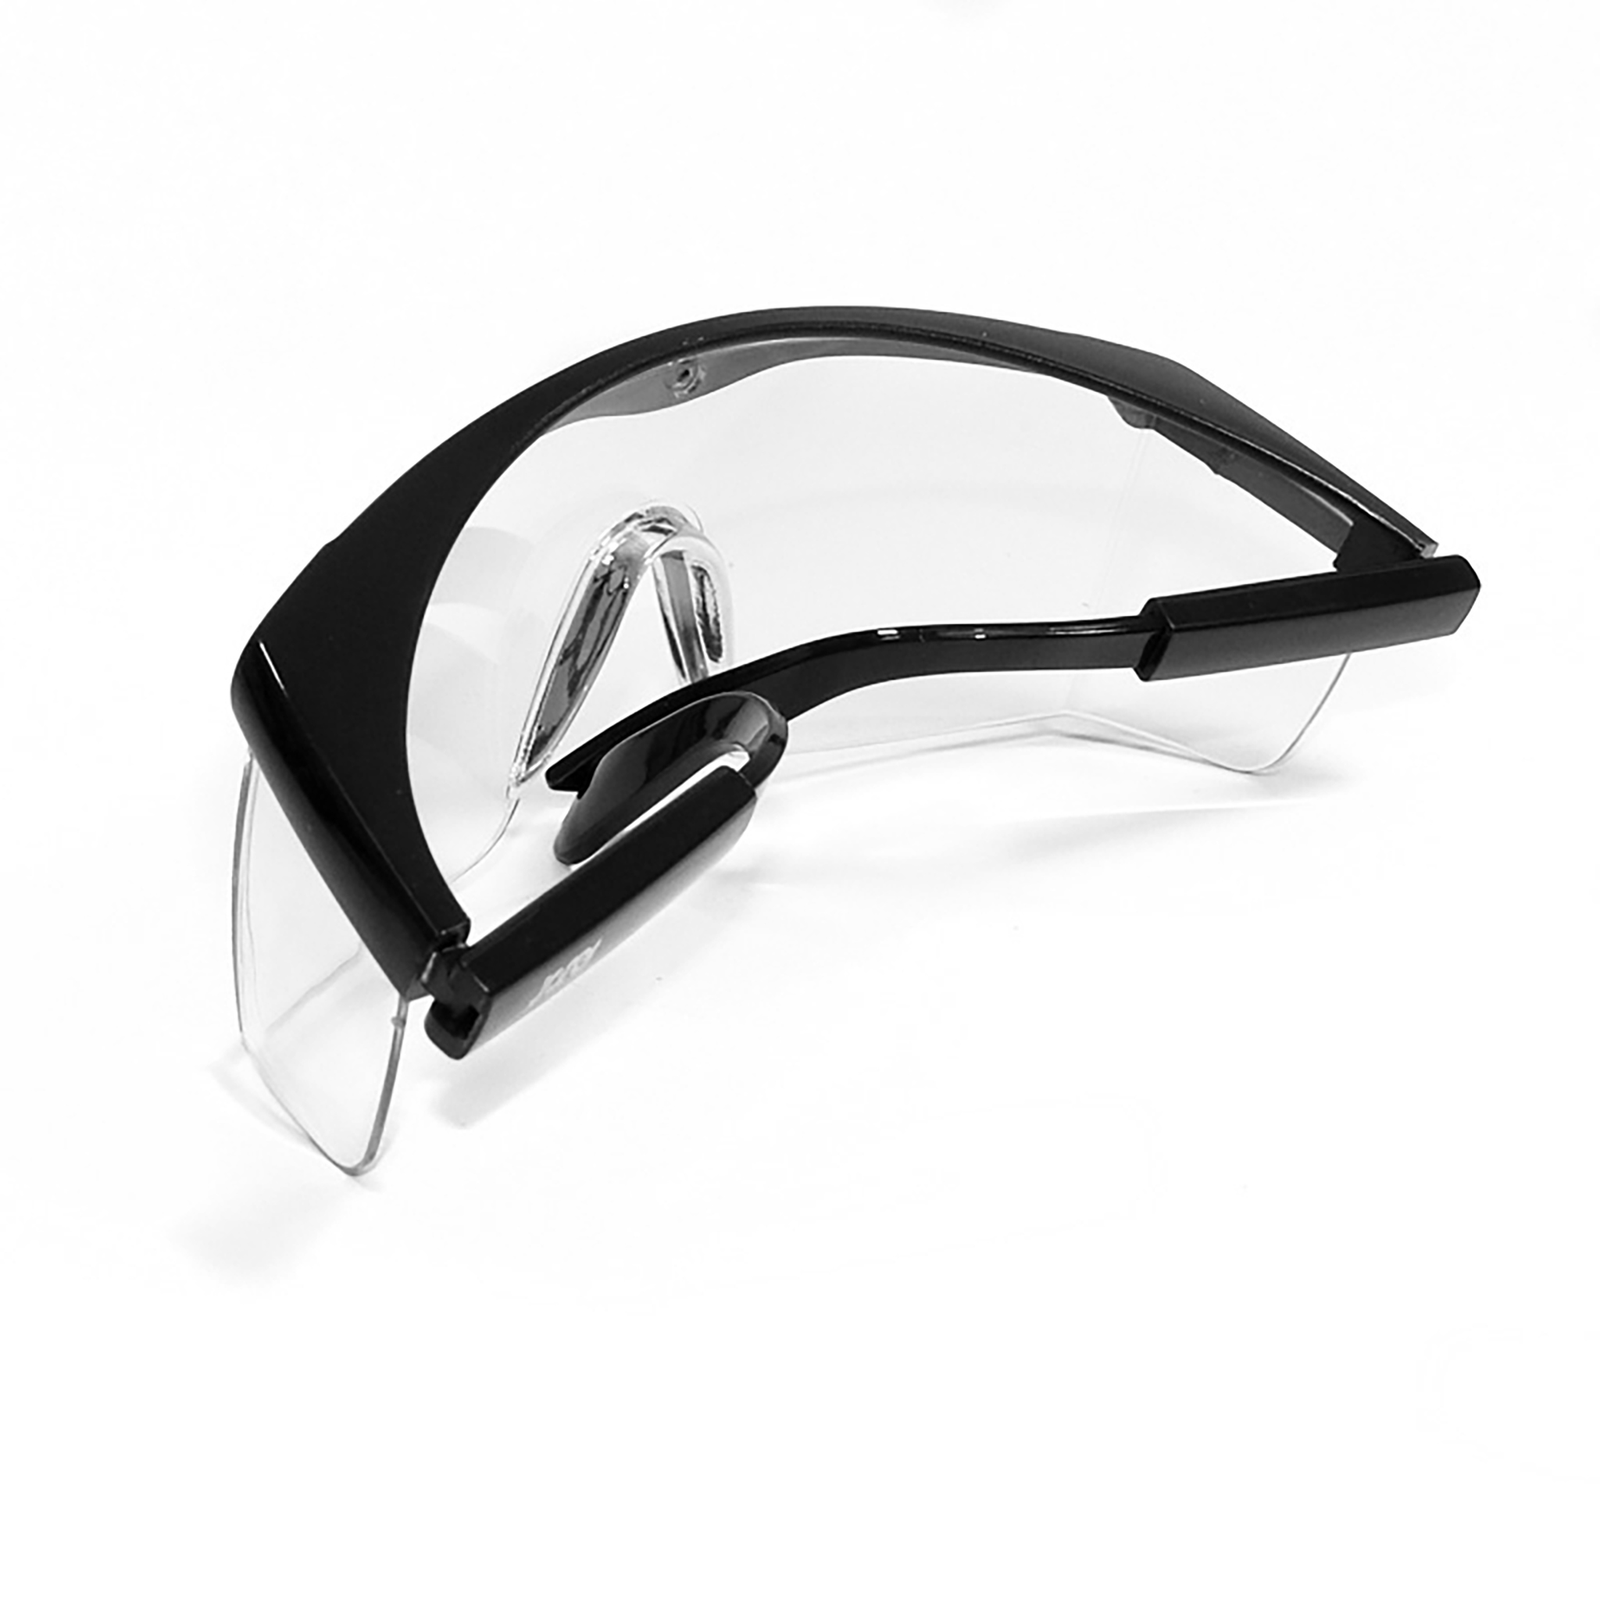 back folded view of the black framed rectangular polycarbonate safety clear glasses with side shields for high impact protection with adjustable temple legs